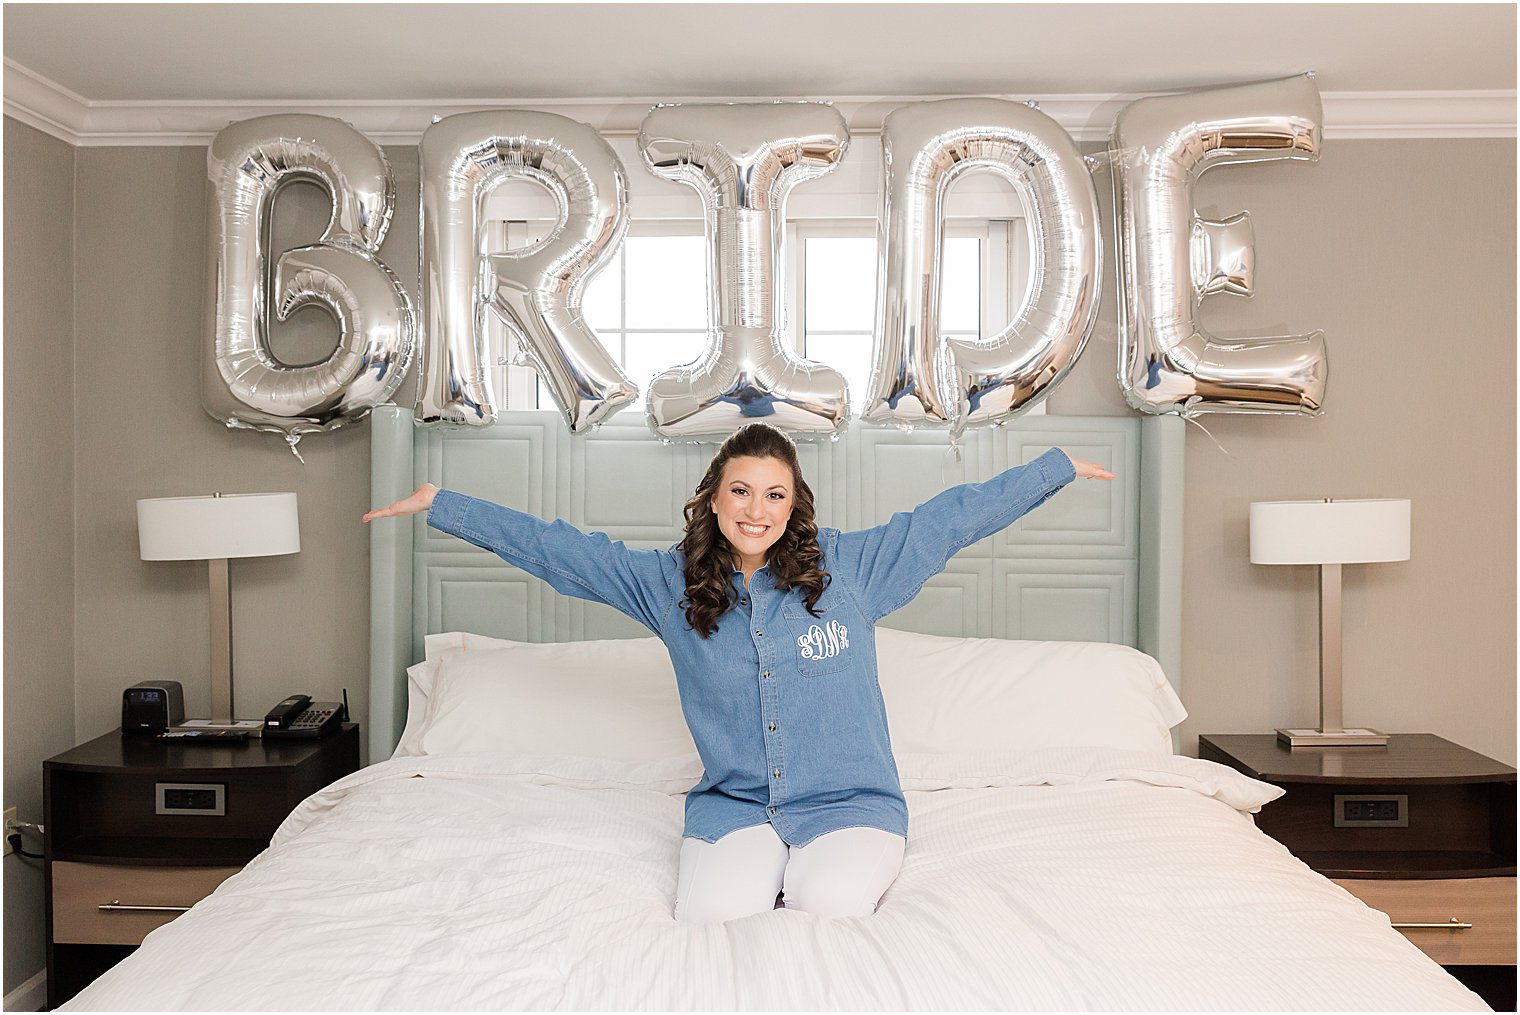 bride kneels on bed in button up shirt under BRIDE balloons 